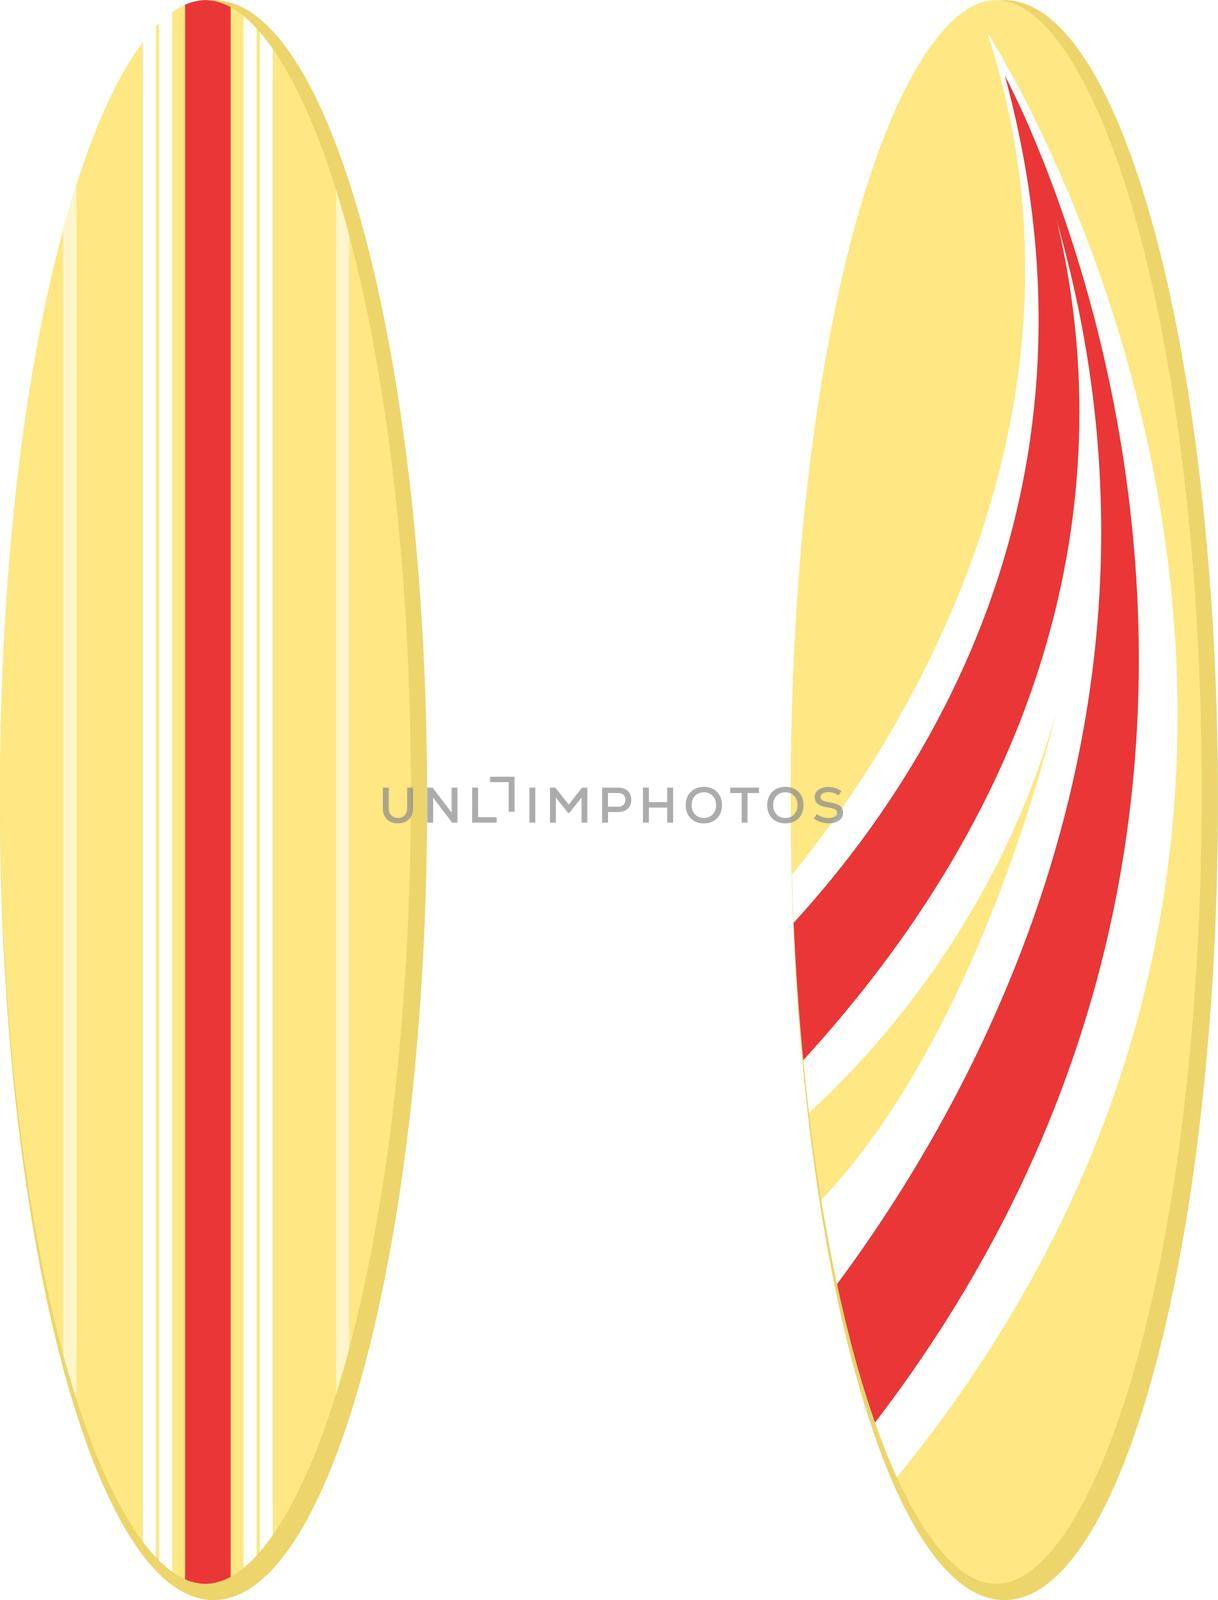 Surfing board, illustration, vector on white background.